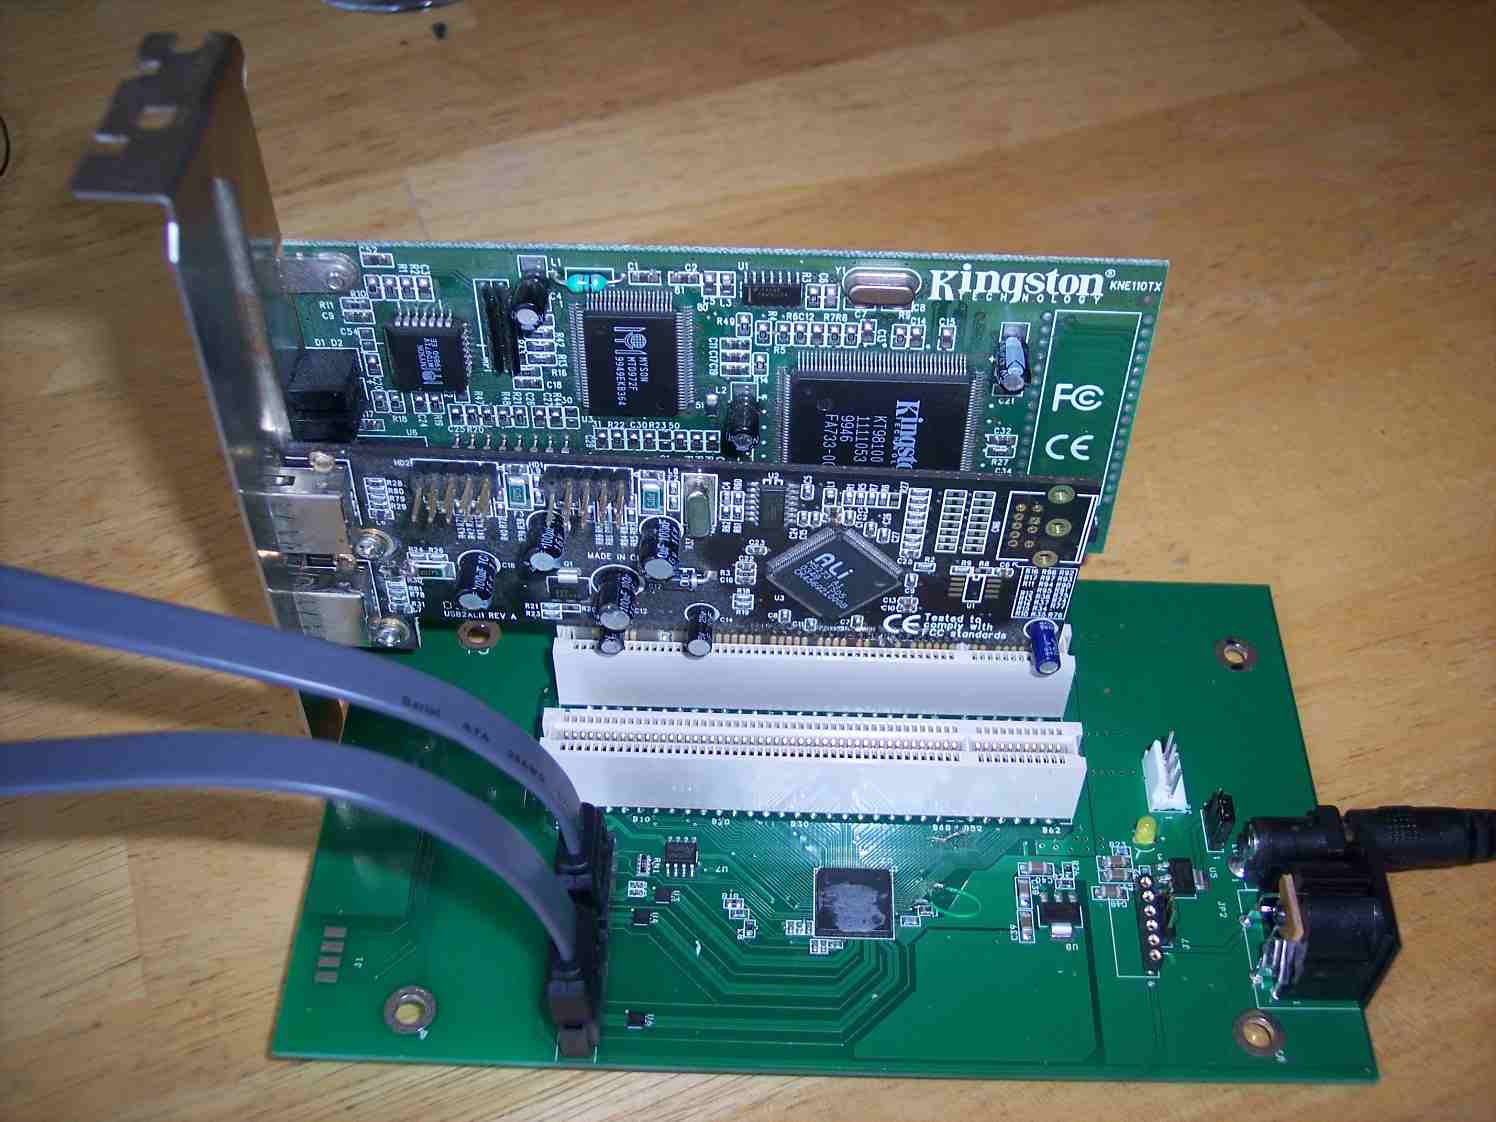 PCI cards inserted on xprs-pci-x3